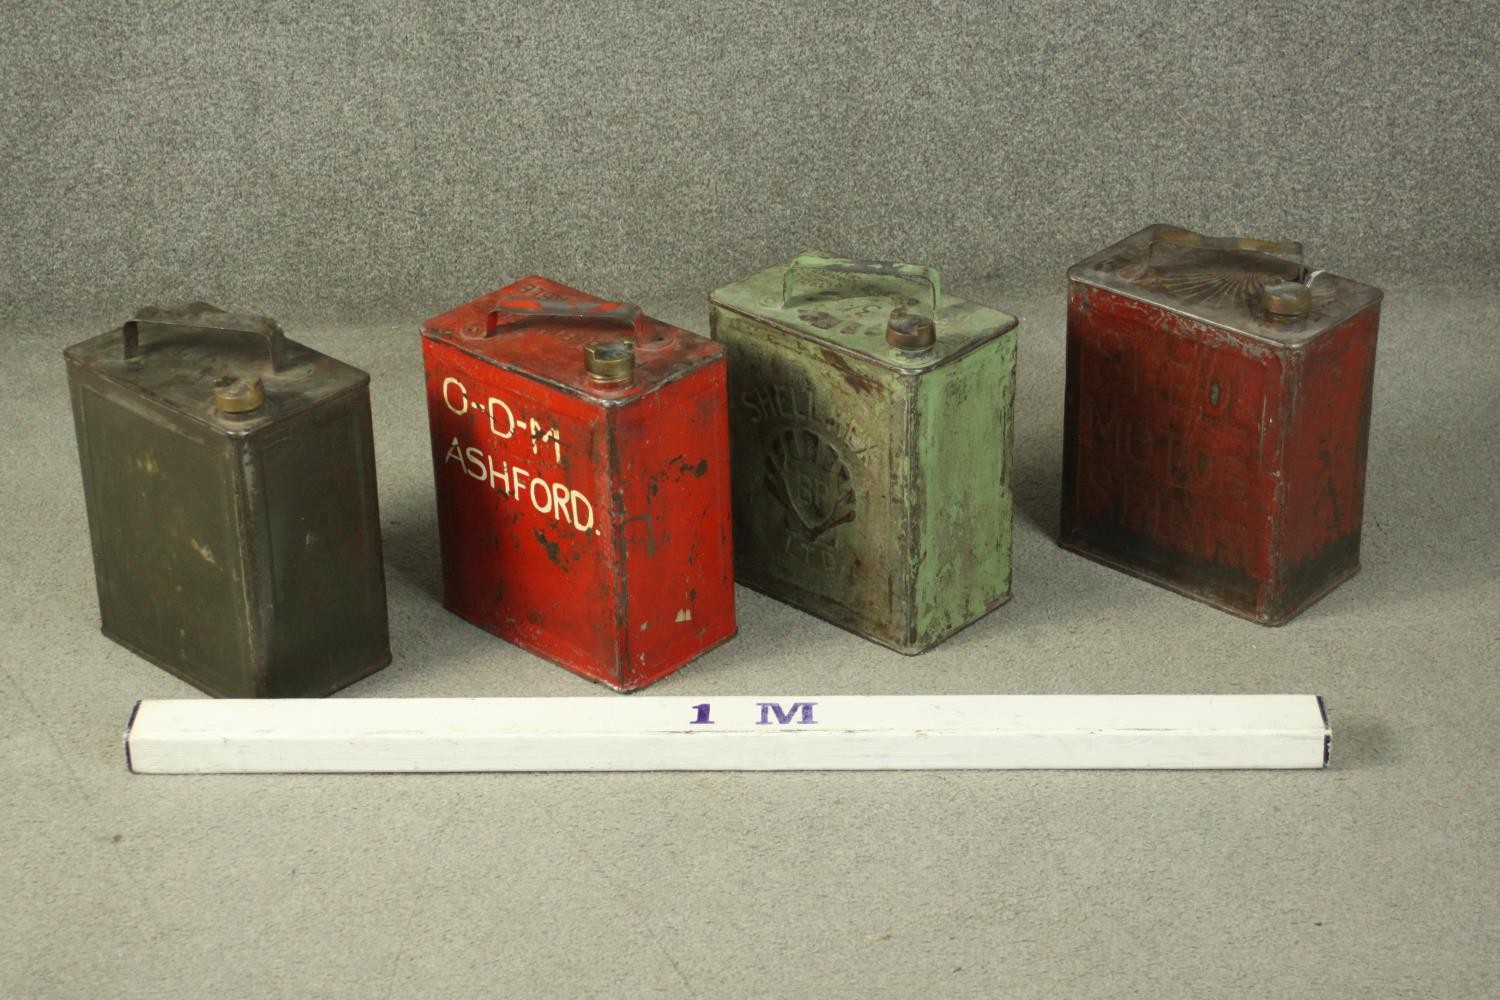 Four 20th century painted metal Jerry cans, marked for O-D-M Ashford, Insect Repellent, BP Ltd Shell - Image 2 of 6